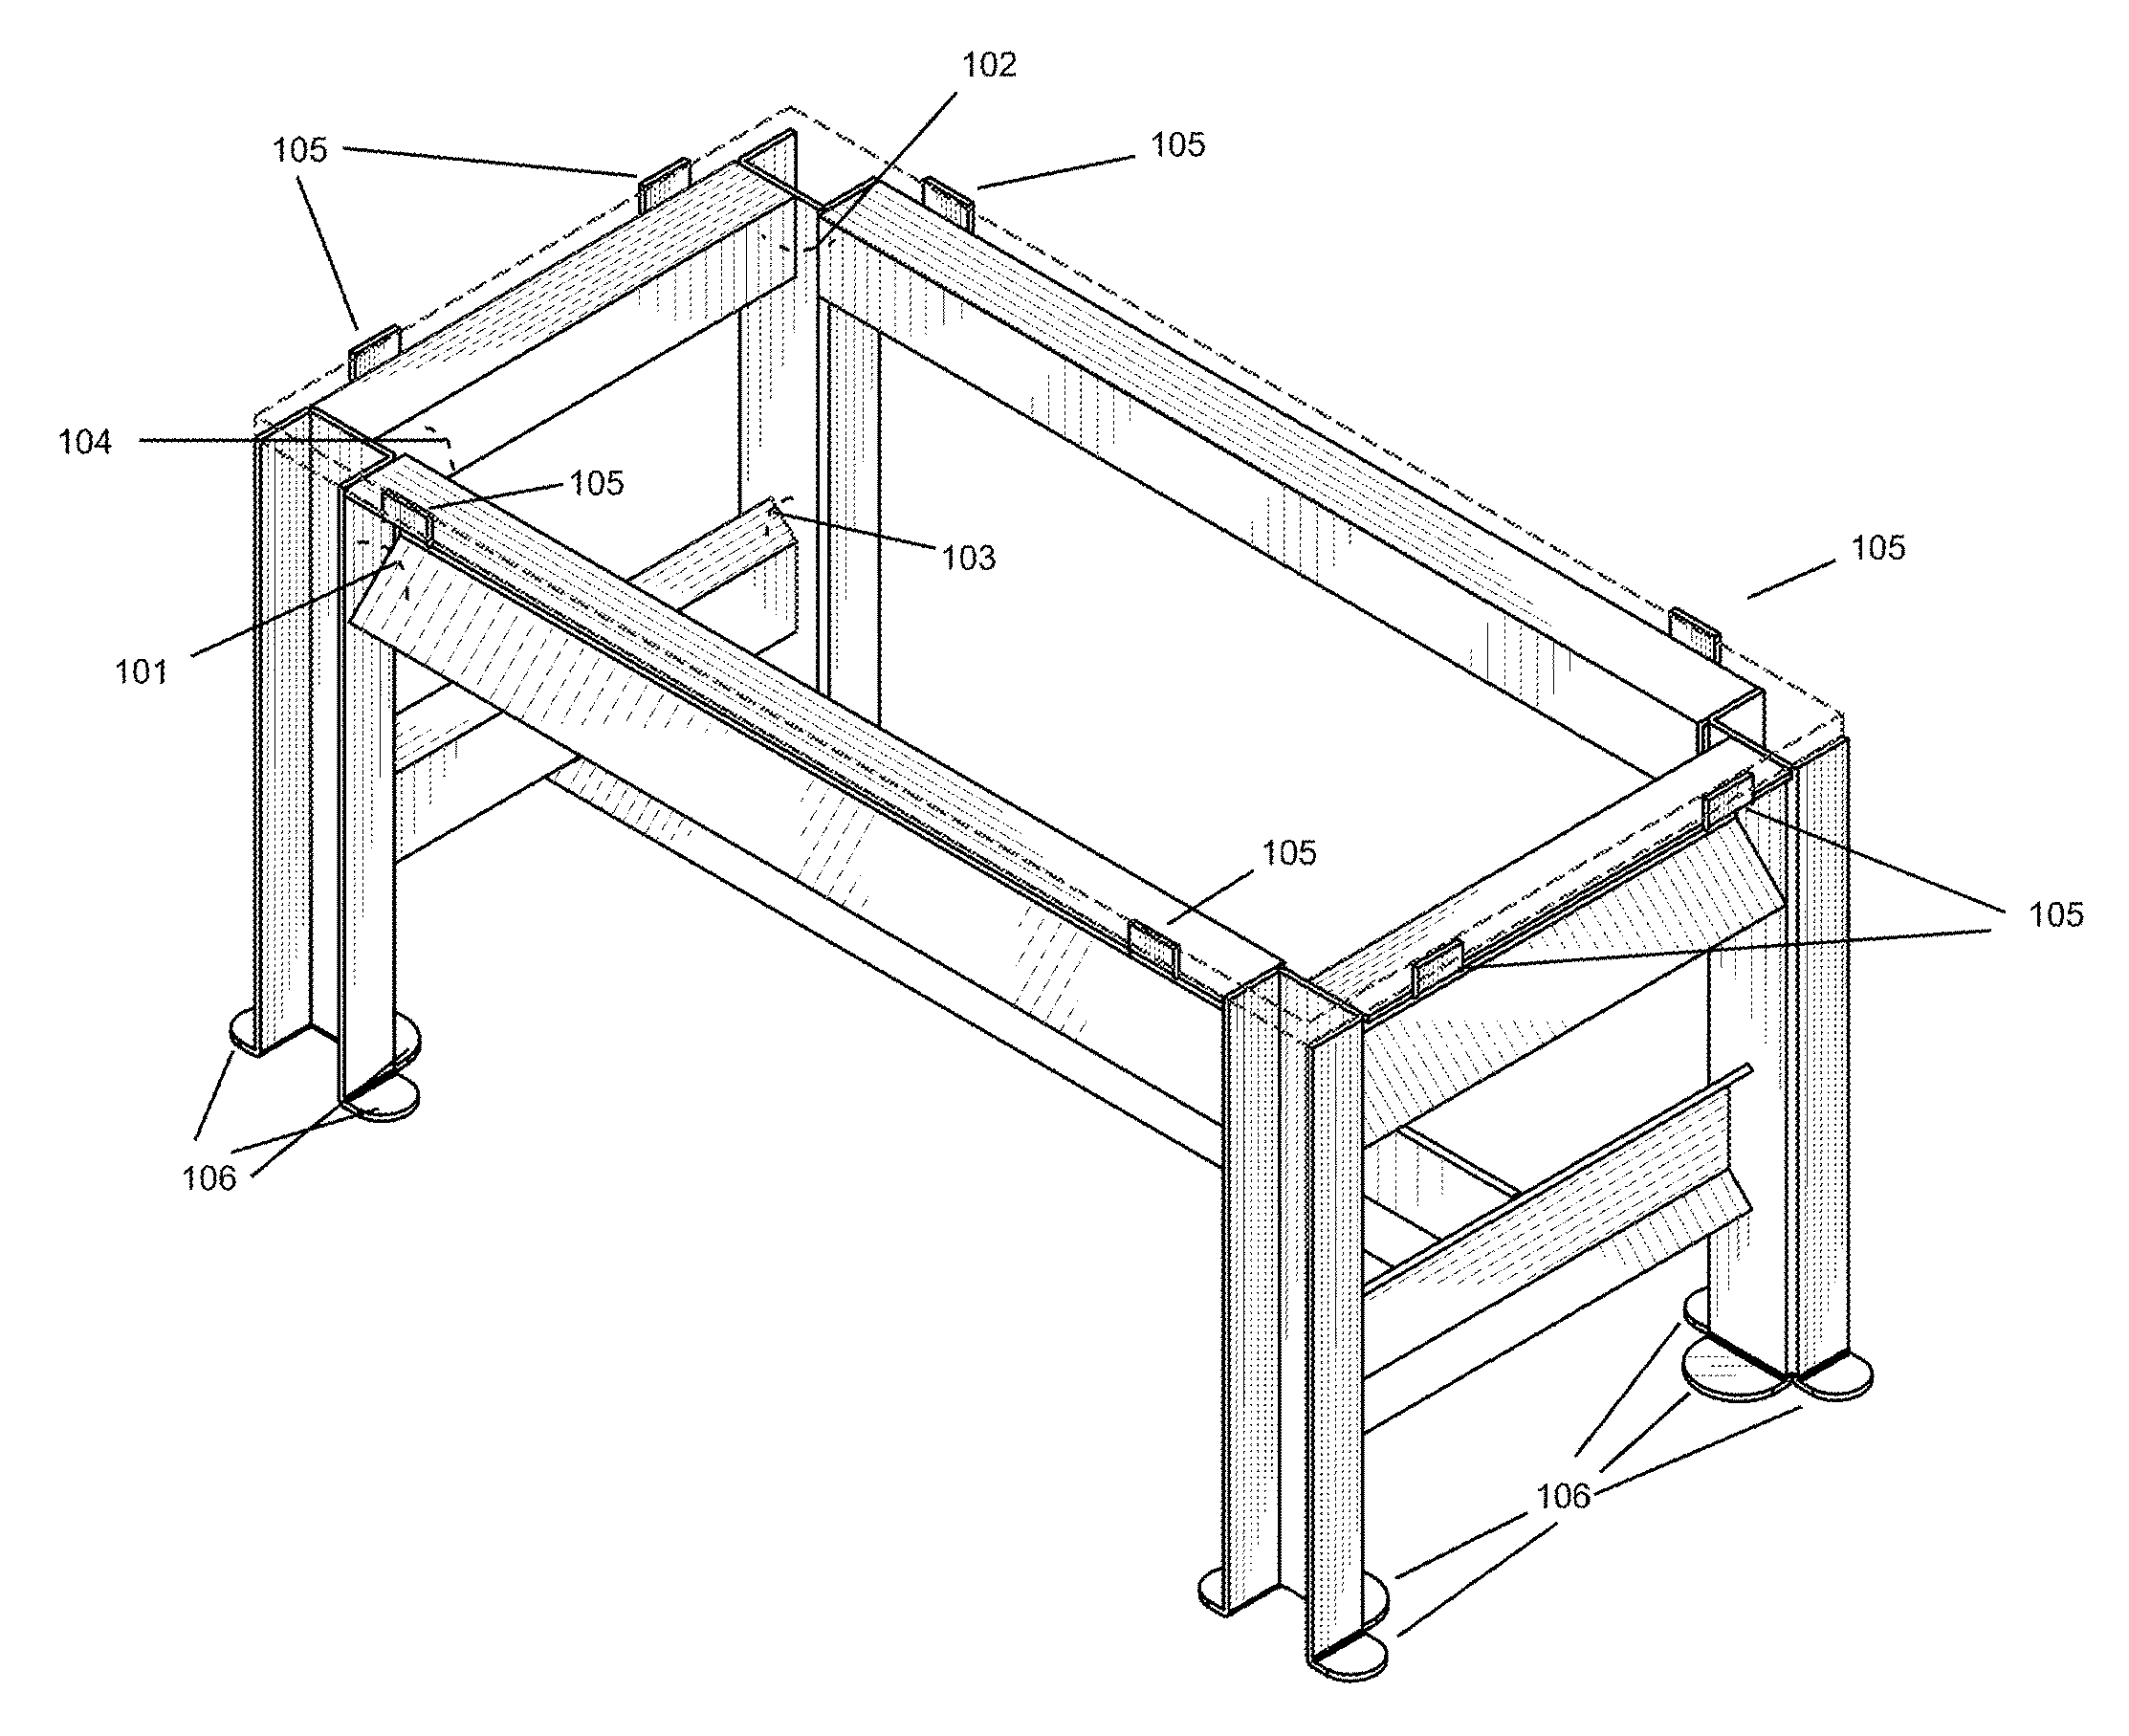 Sterilizable platform with configurable frame and method of constructing